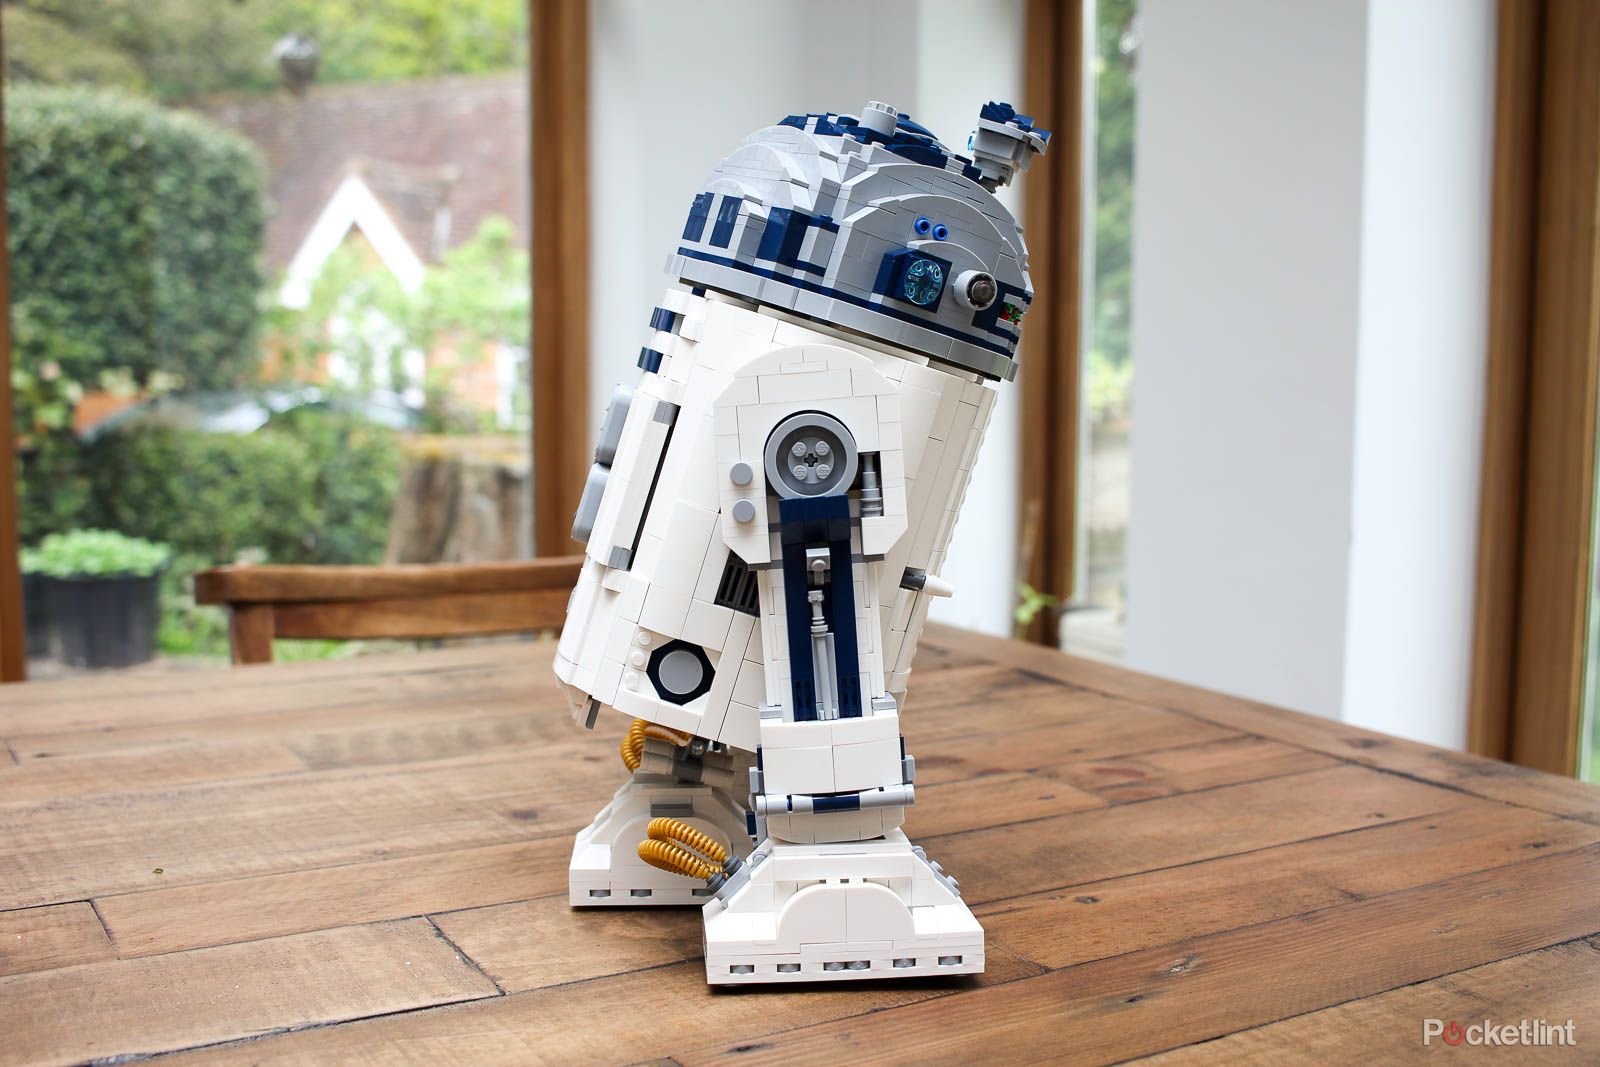 Lego R2-D2 hands on build pictures photo 16